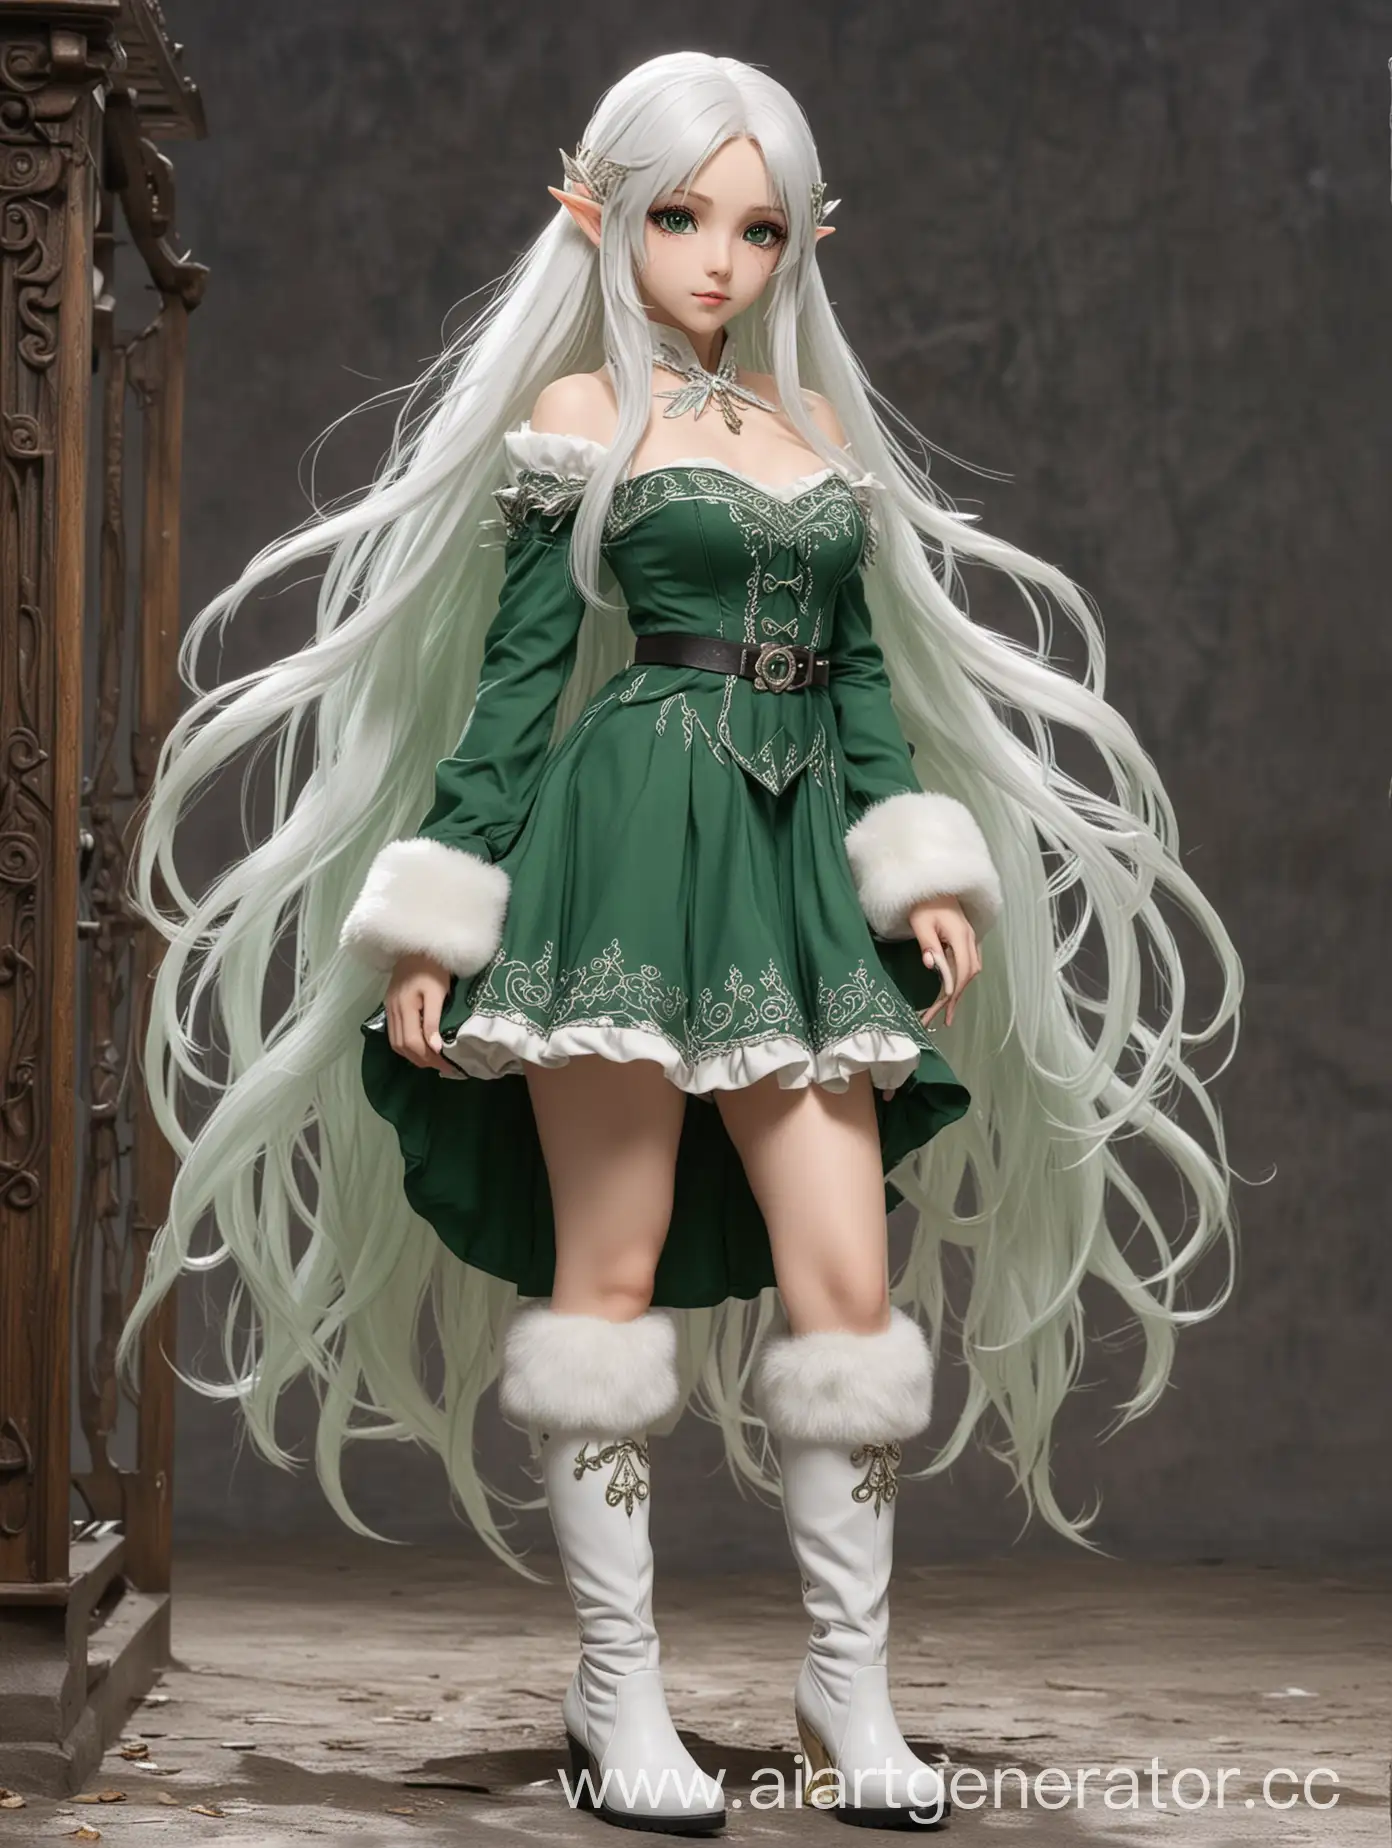 Elf-Girl-with-Long-White-Hair-in-WhiteGreen-Dress-and-FurTrimmed-Boots